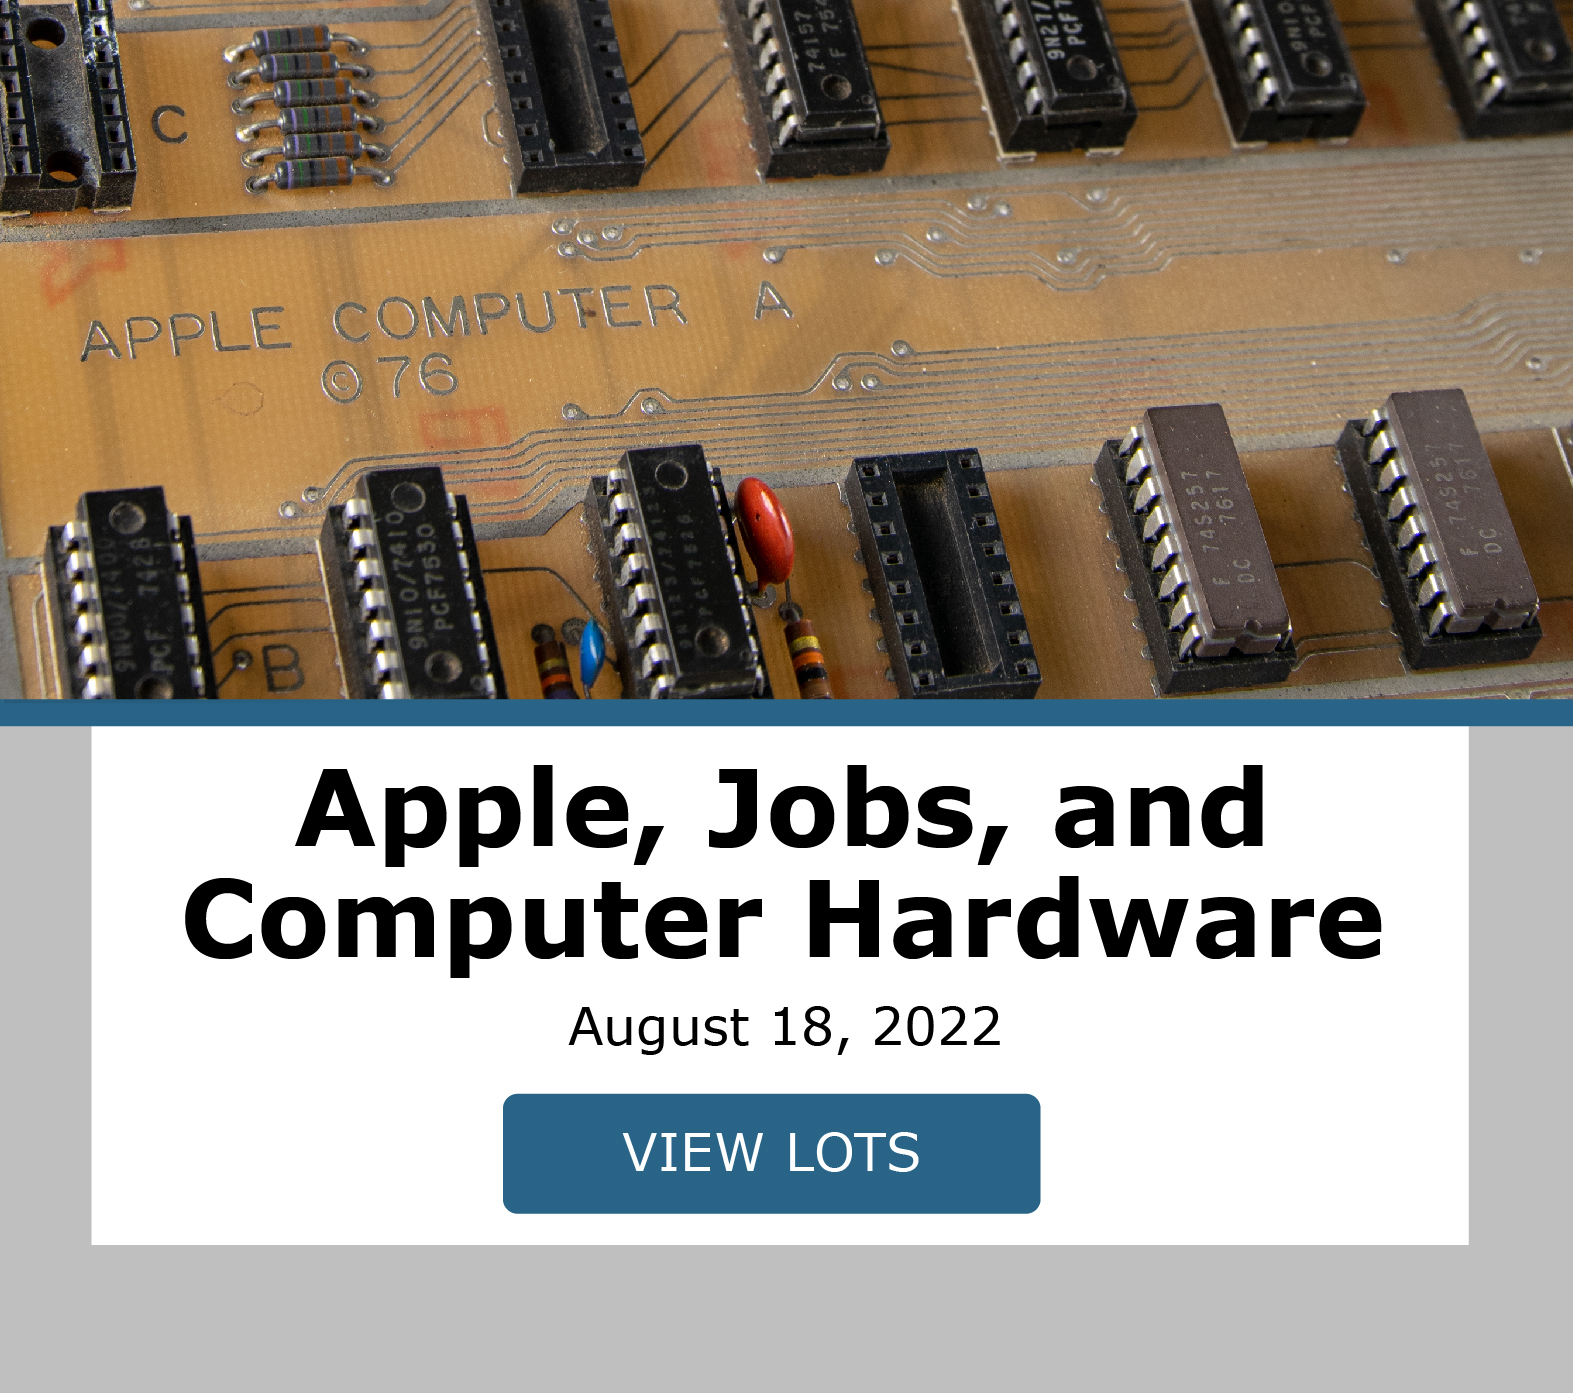 Apple, Jobs, and Computer Hardware